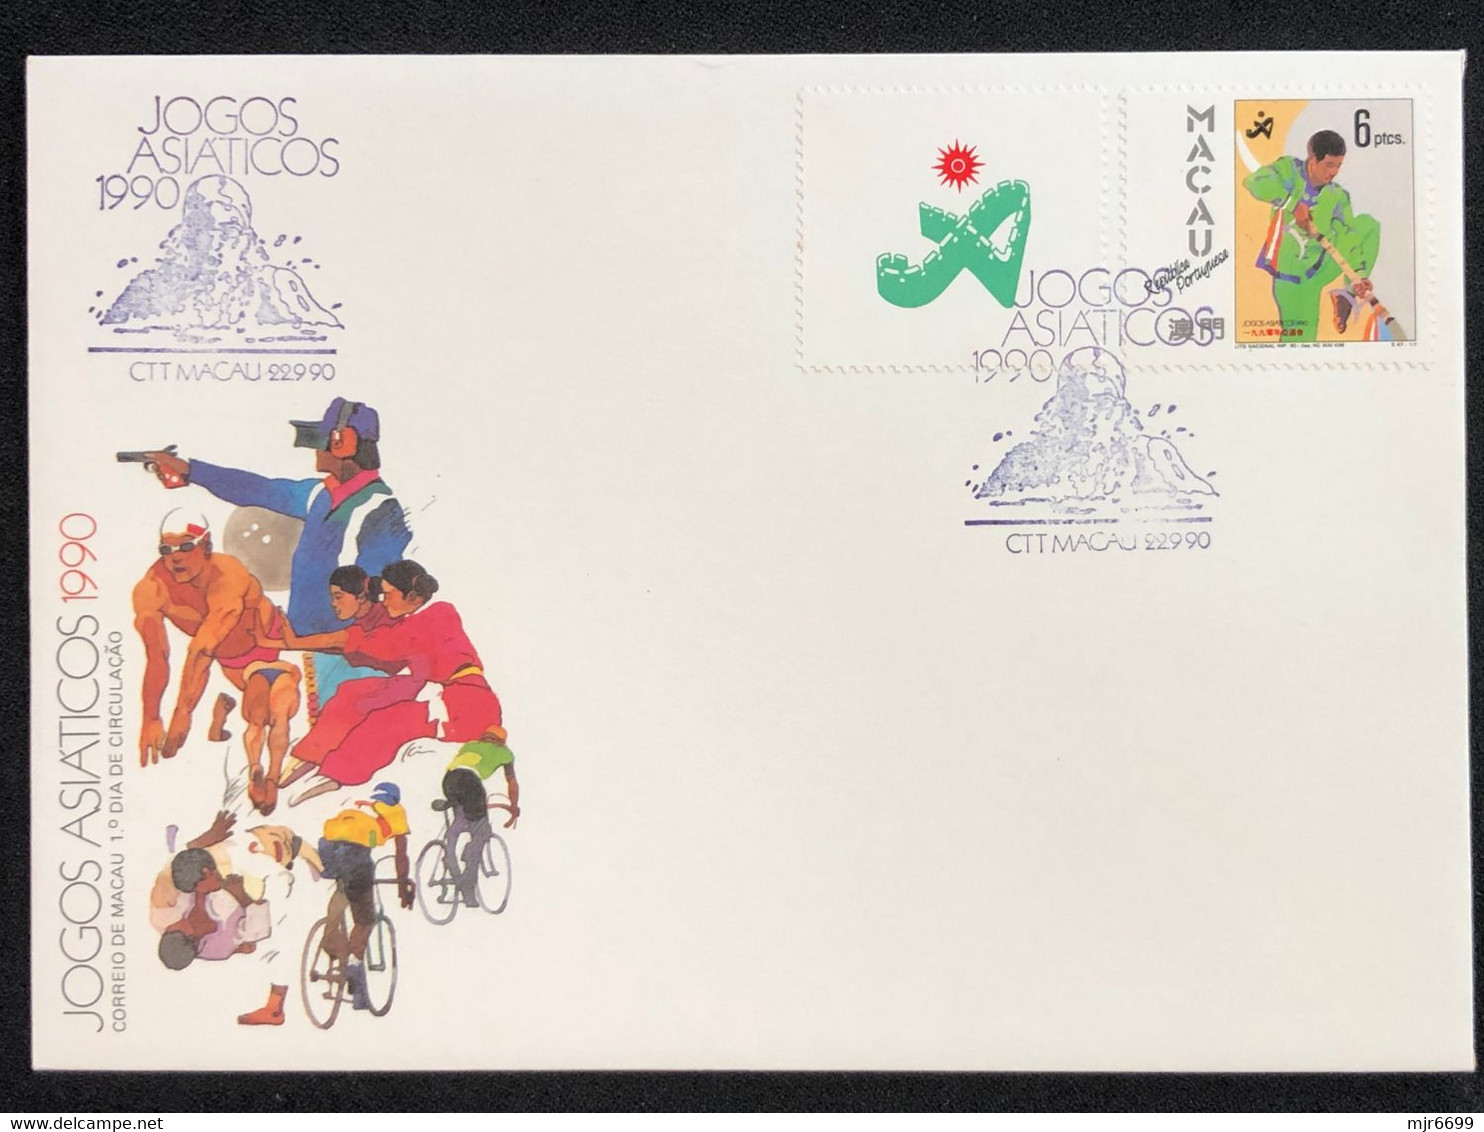 MACAU 1990 BEIJING ASIAN GAMES FDC WITH STAMP OF THE S\S - FDC